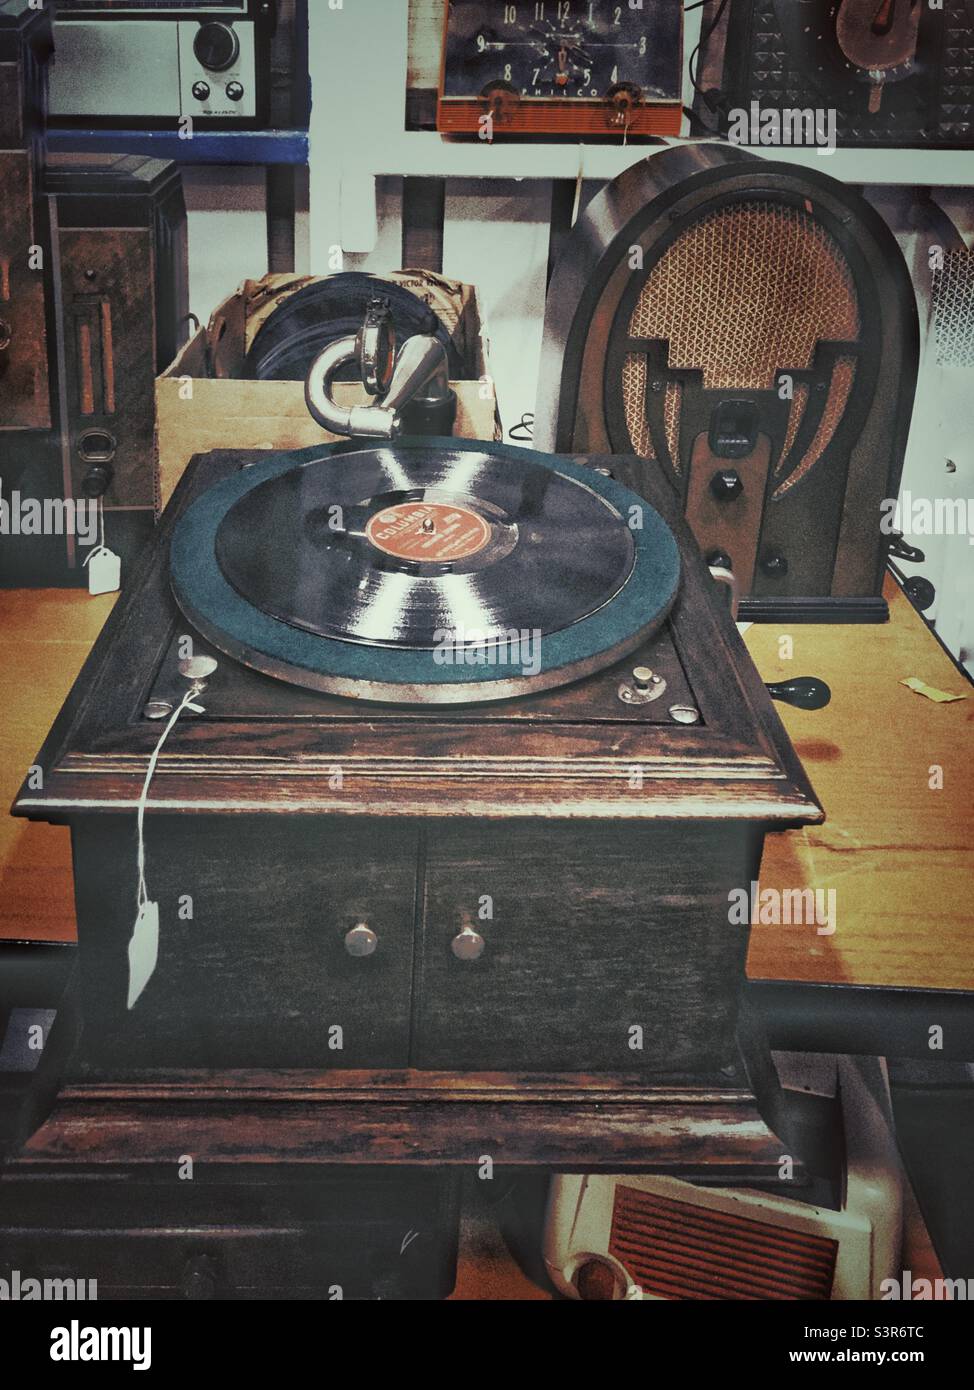 Vintage phonograph and tabletop radio on display with 78 rpm records Stock Photo